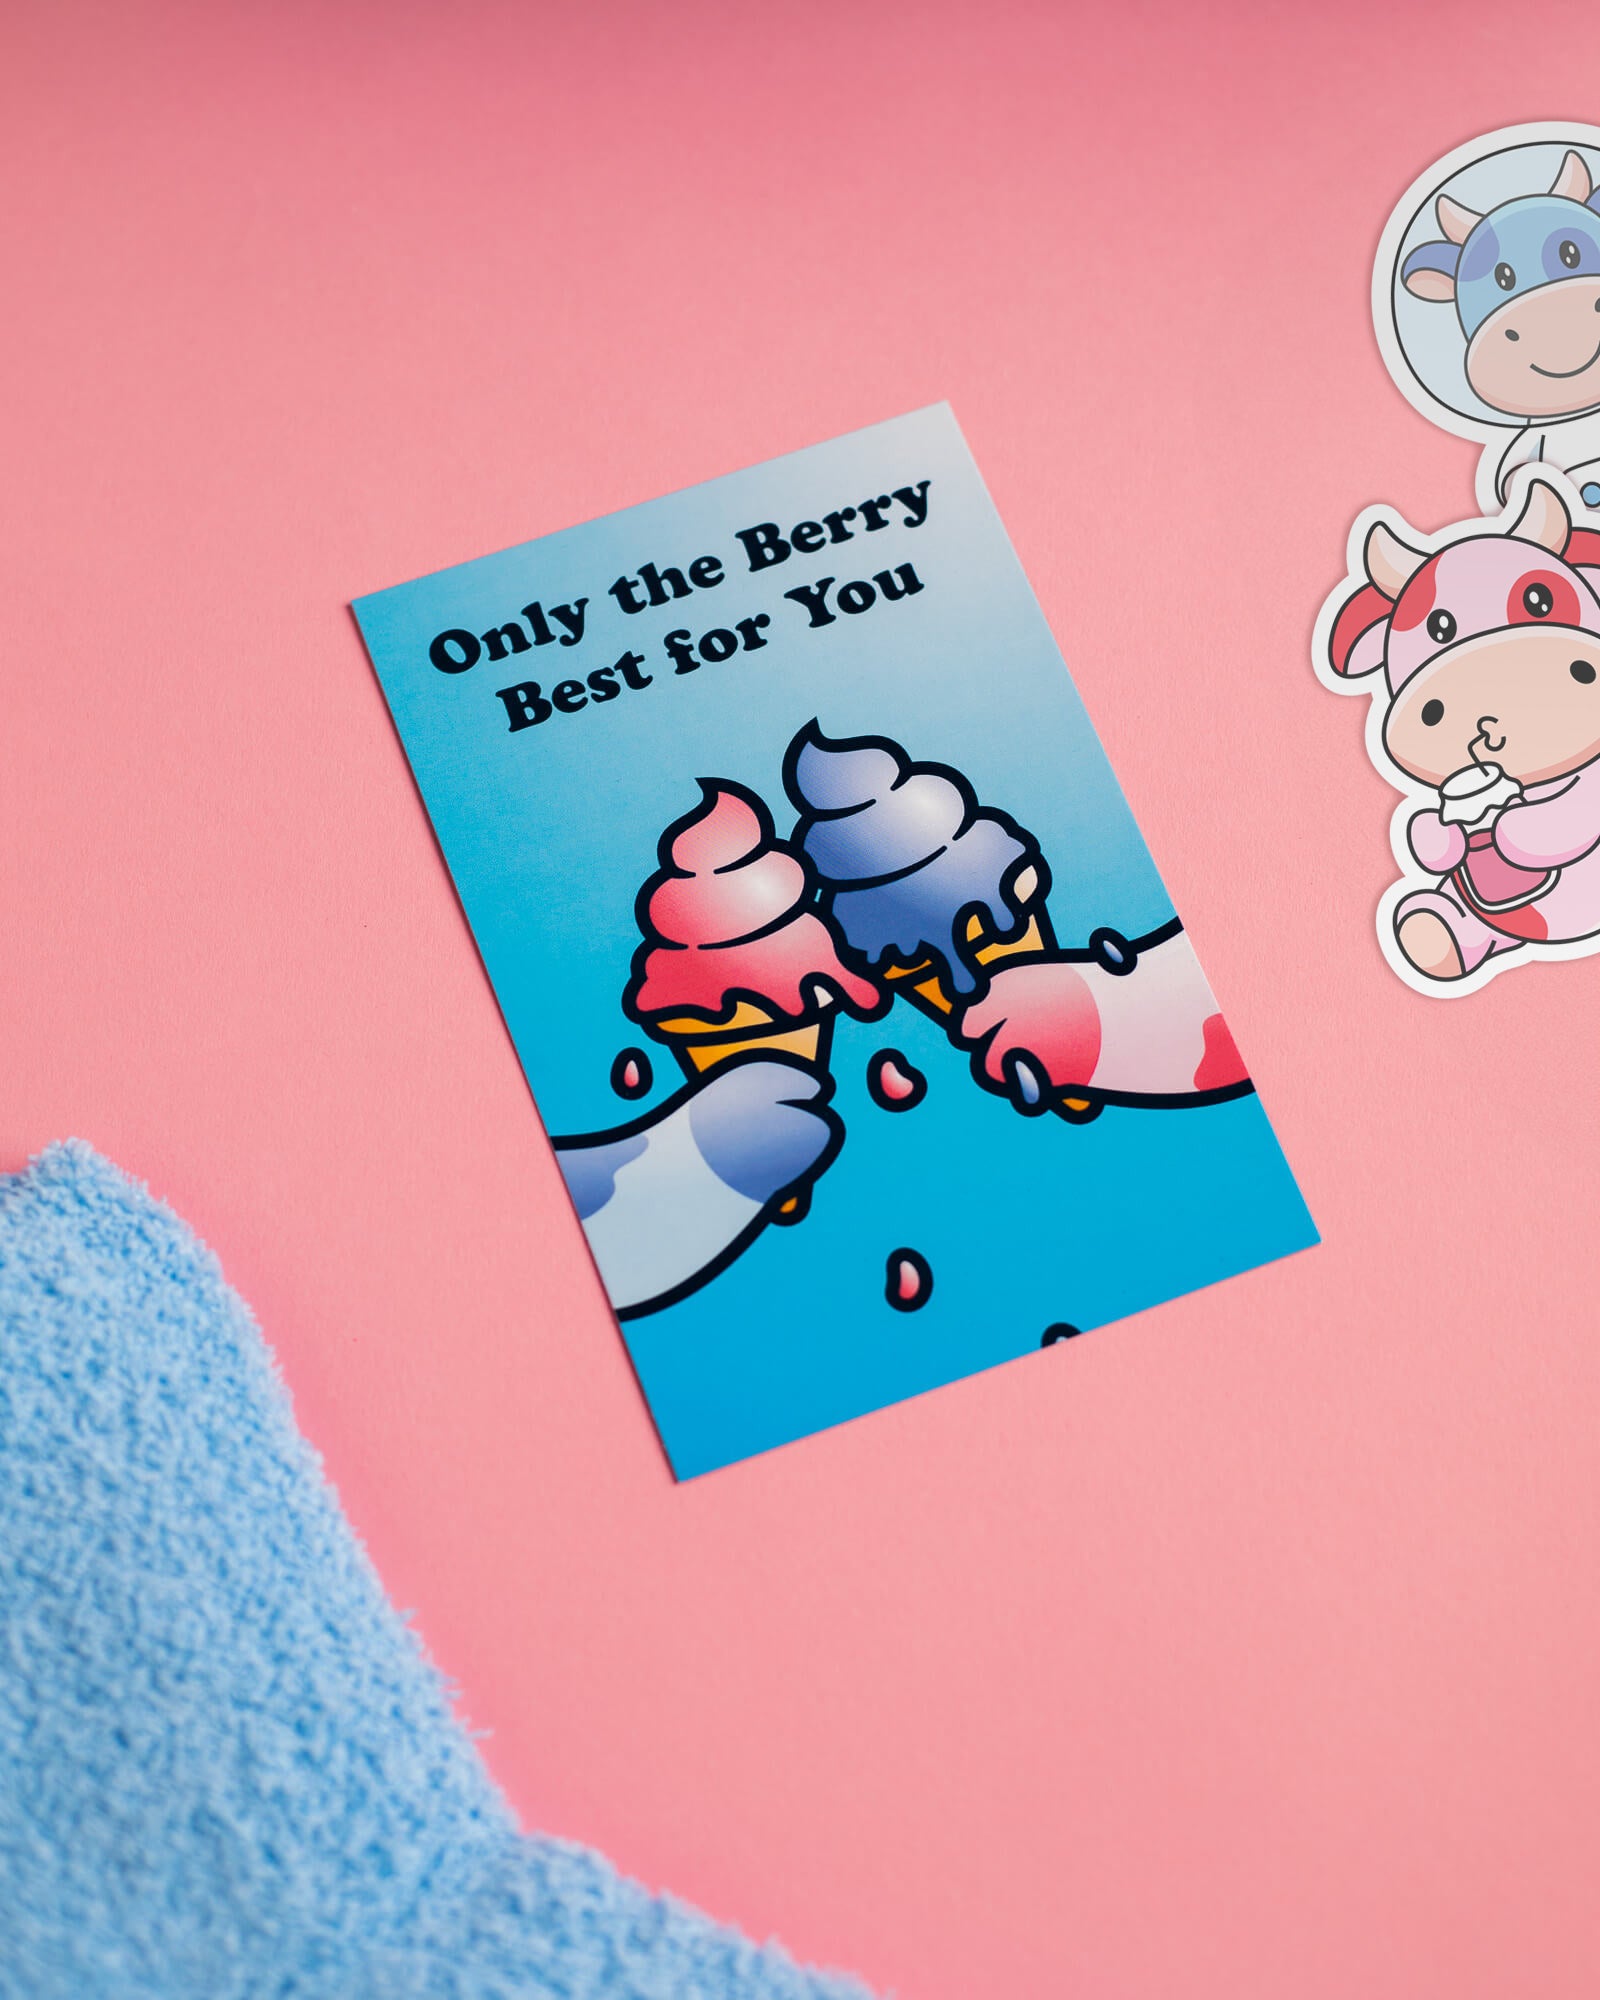 Photo of card saying "Only the Berry Best for You"